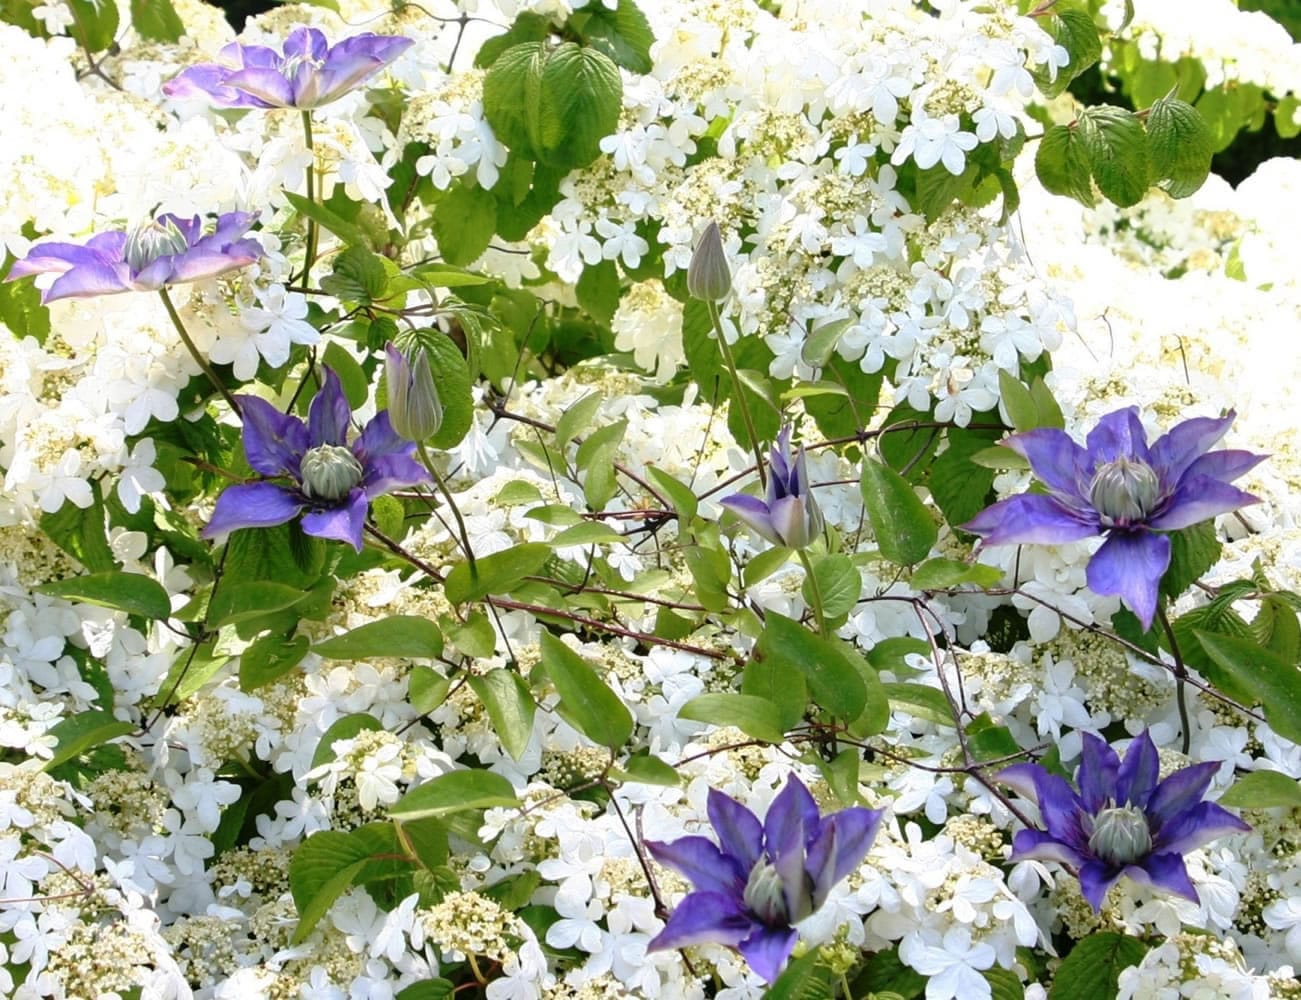 Robb Rosser
The flower display of the classic Shasta Viburnum is intensified by the addition of the climbing Clematis 'Multi-Blue.'